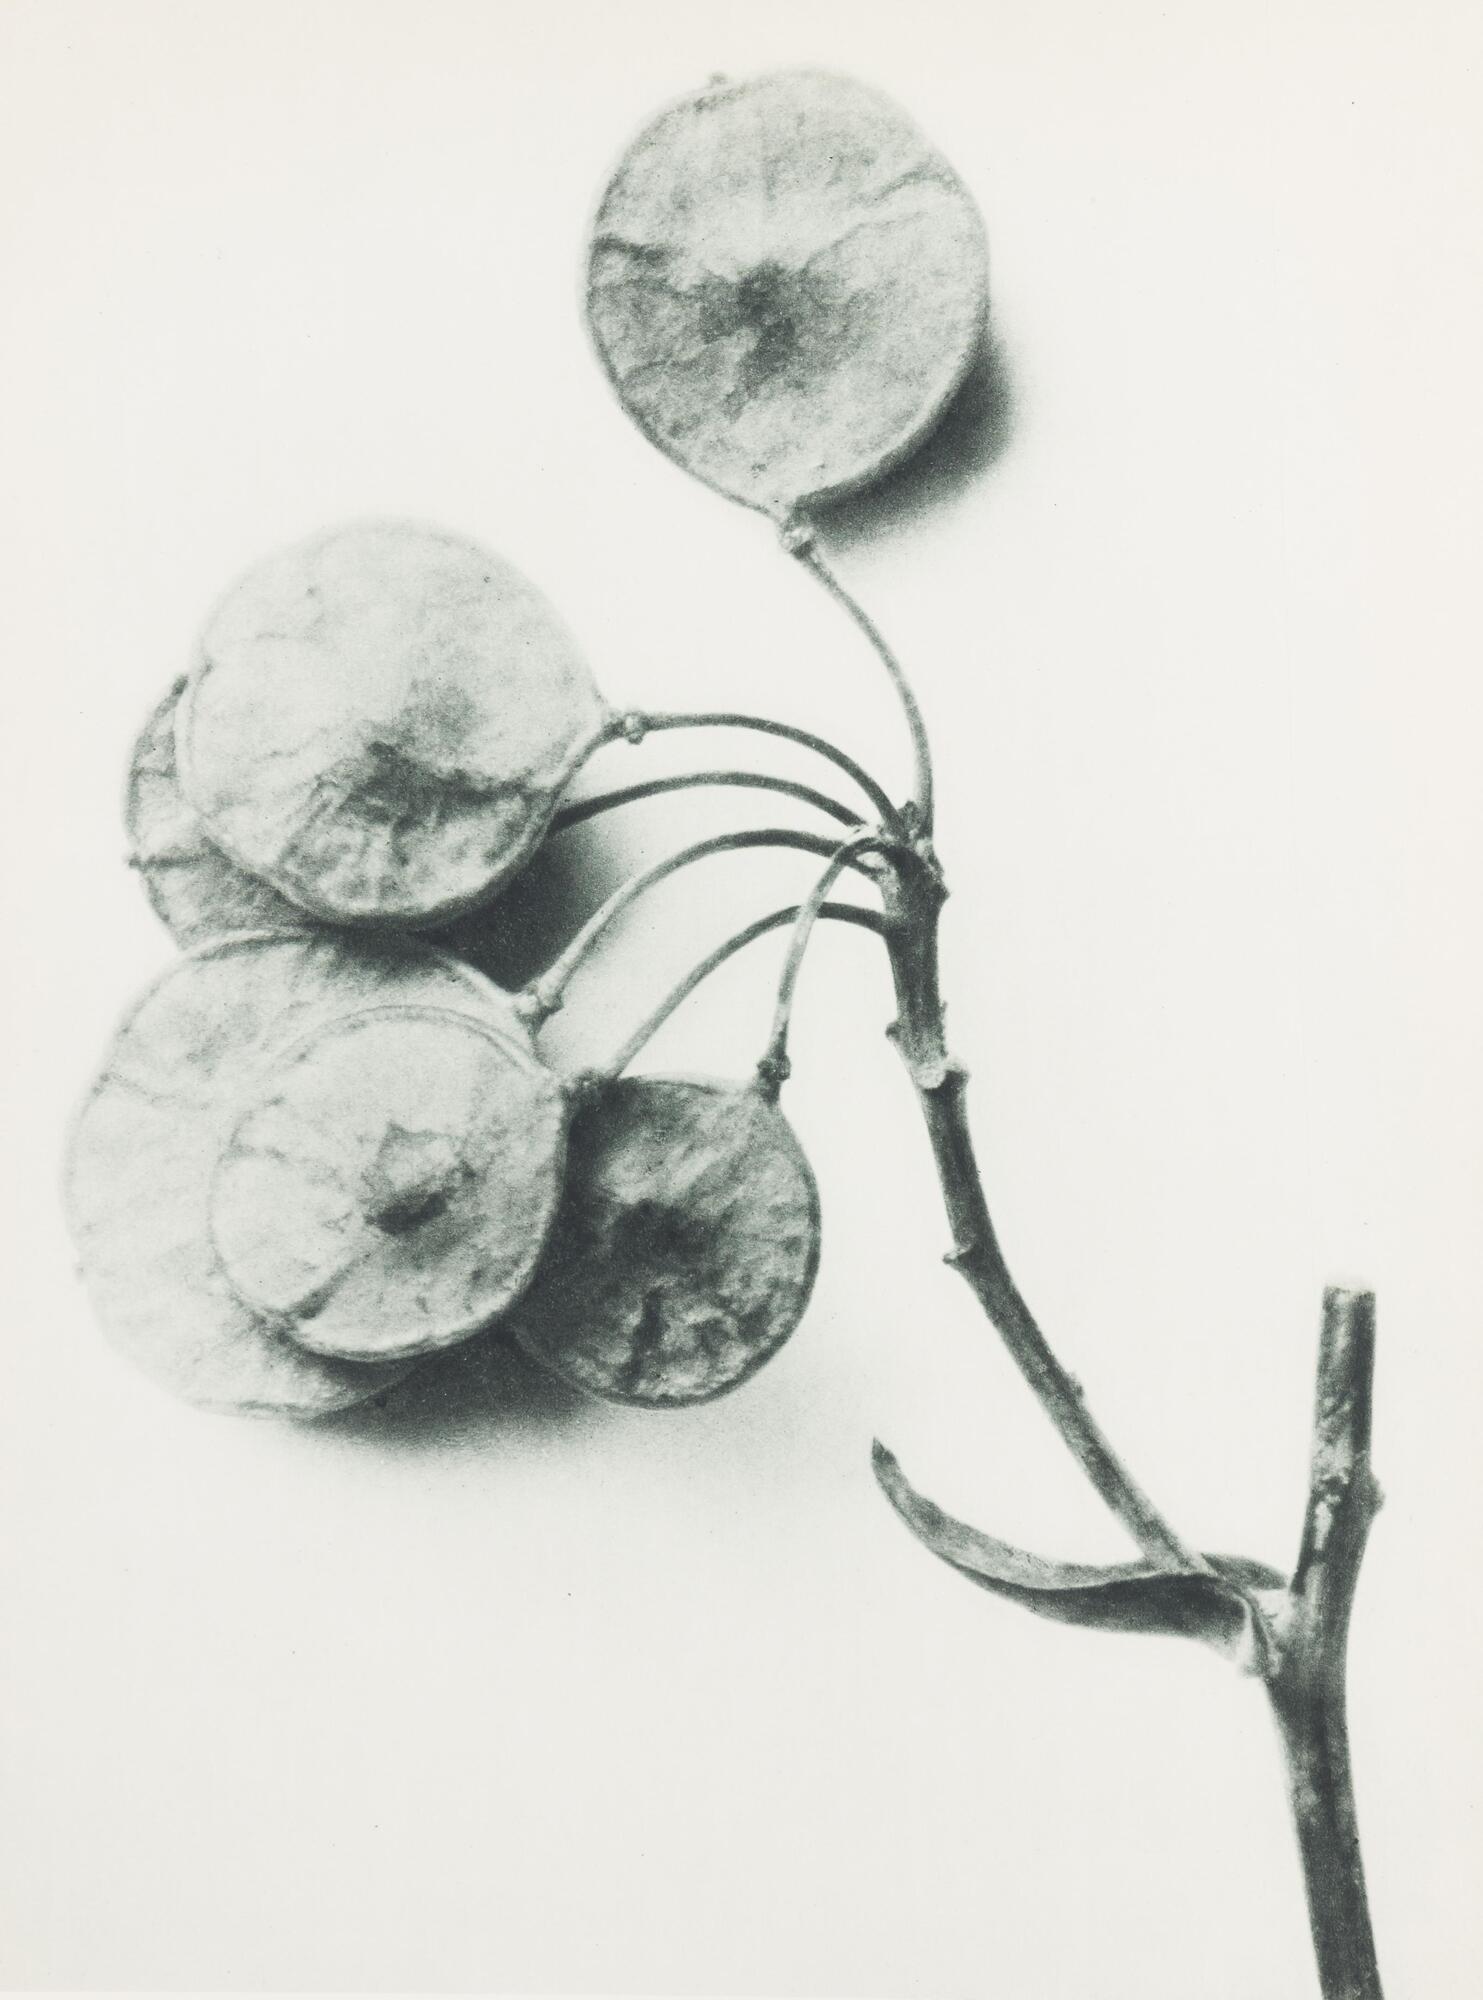 This photograph depicts a closeup view of a plant's seed pods positioned against a light background.  